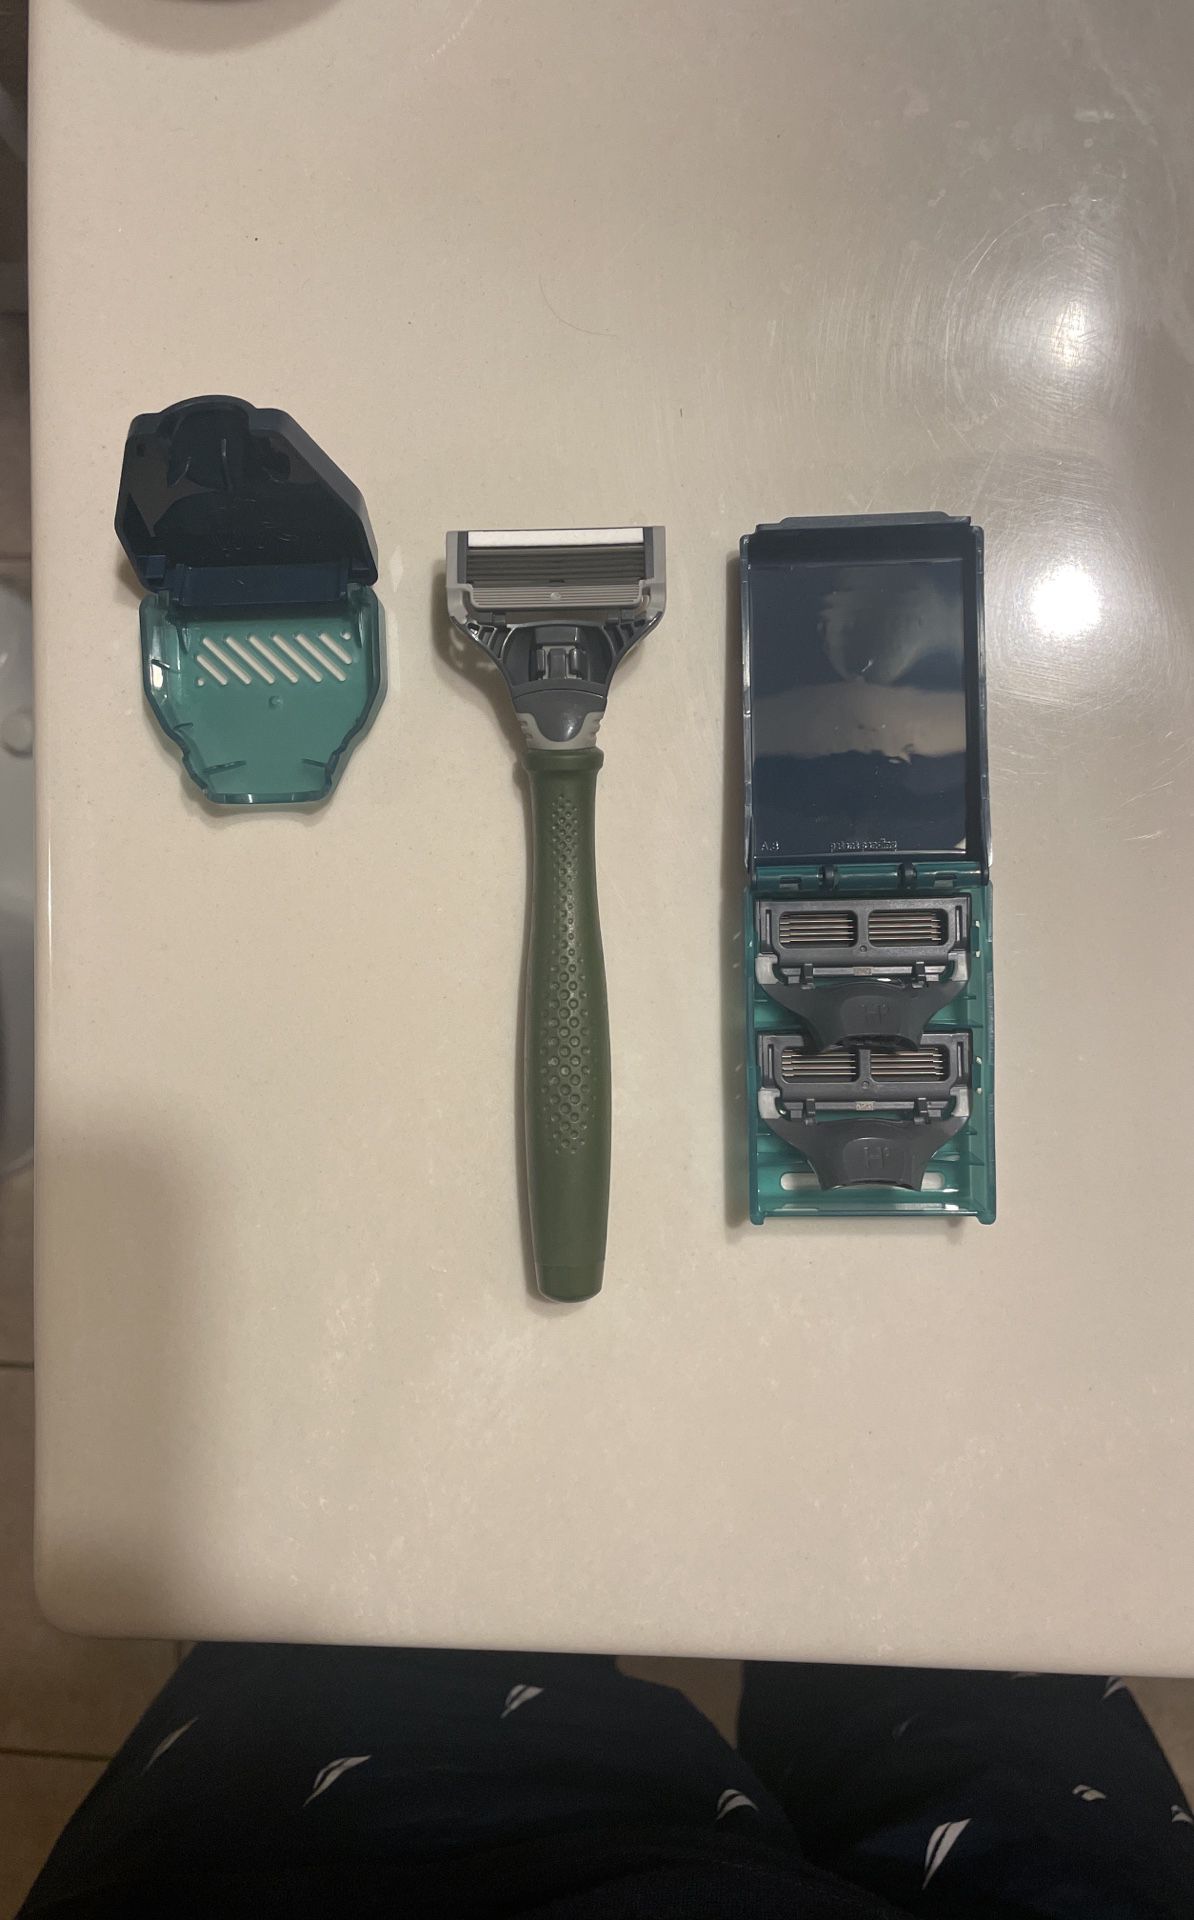 Discontinued Harry’s Razor Army Green ( Like New Condition)